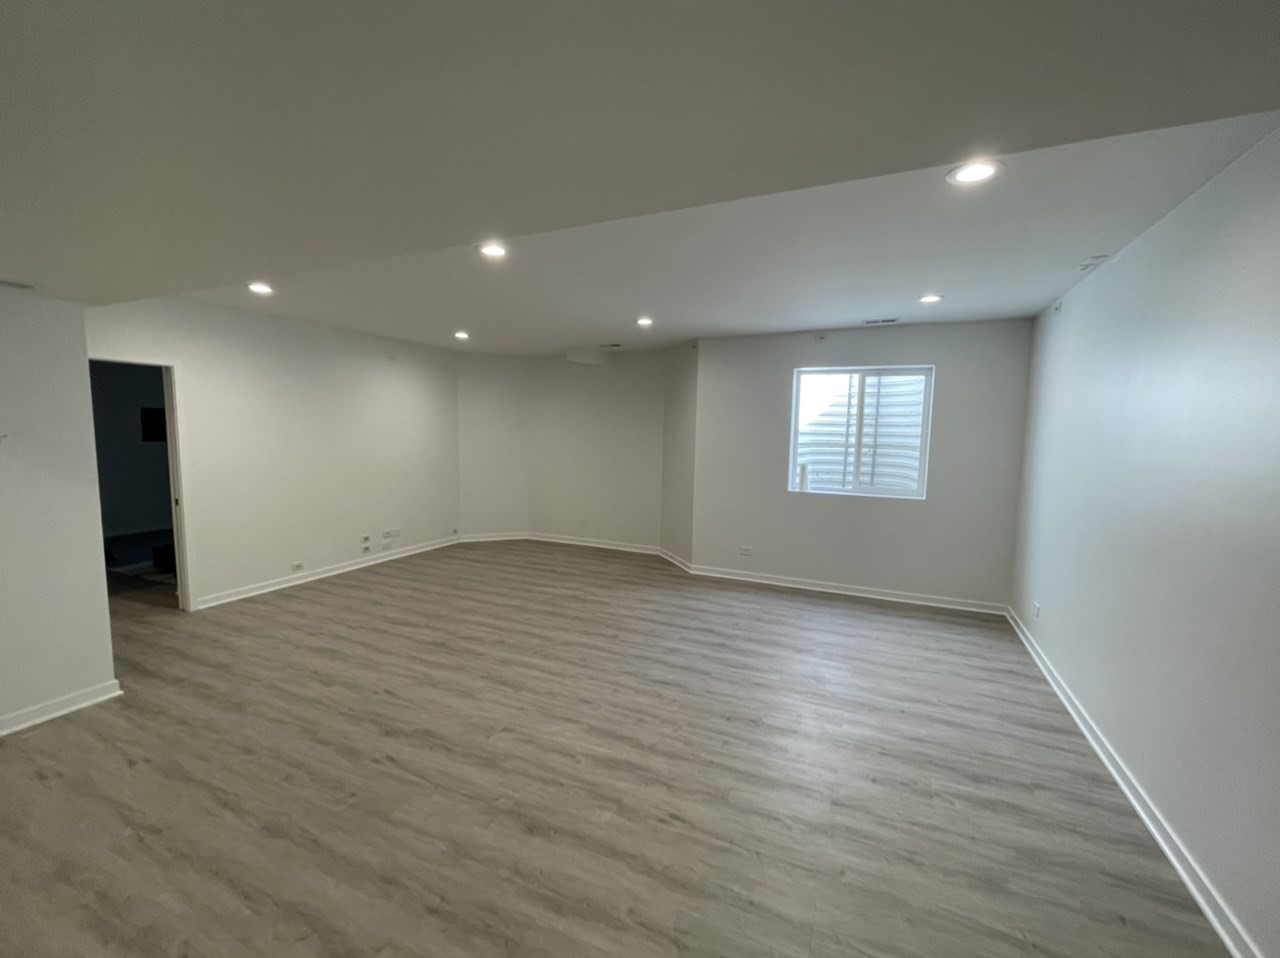 Basement remodel with LVT flooring, white walls, and recessed lighting